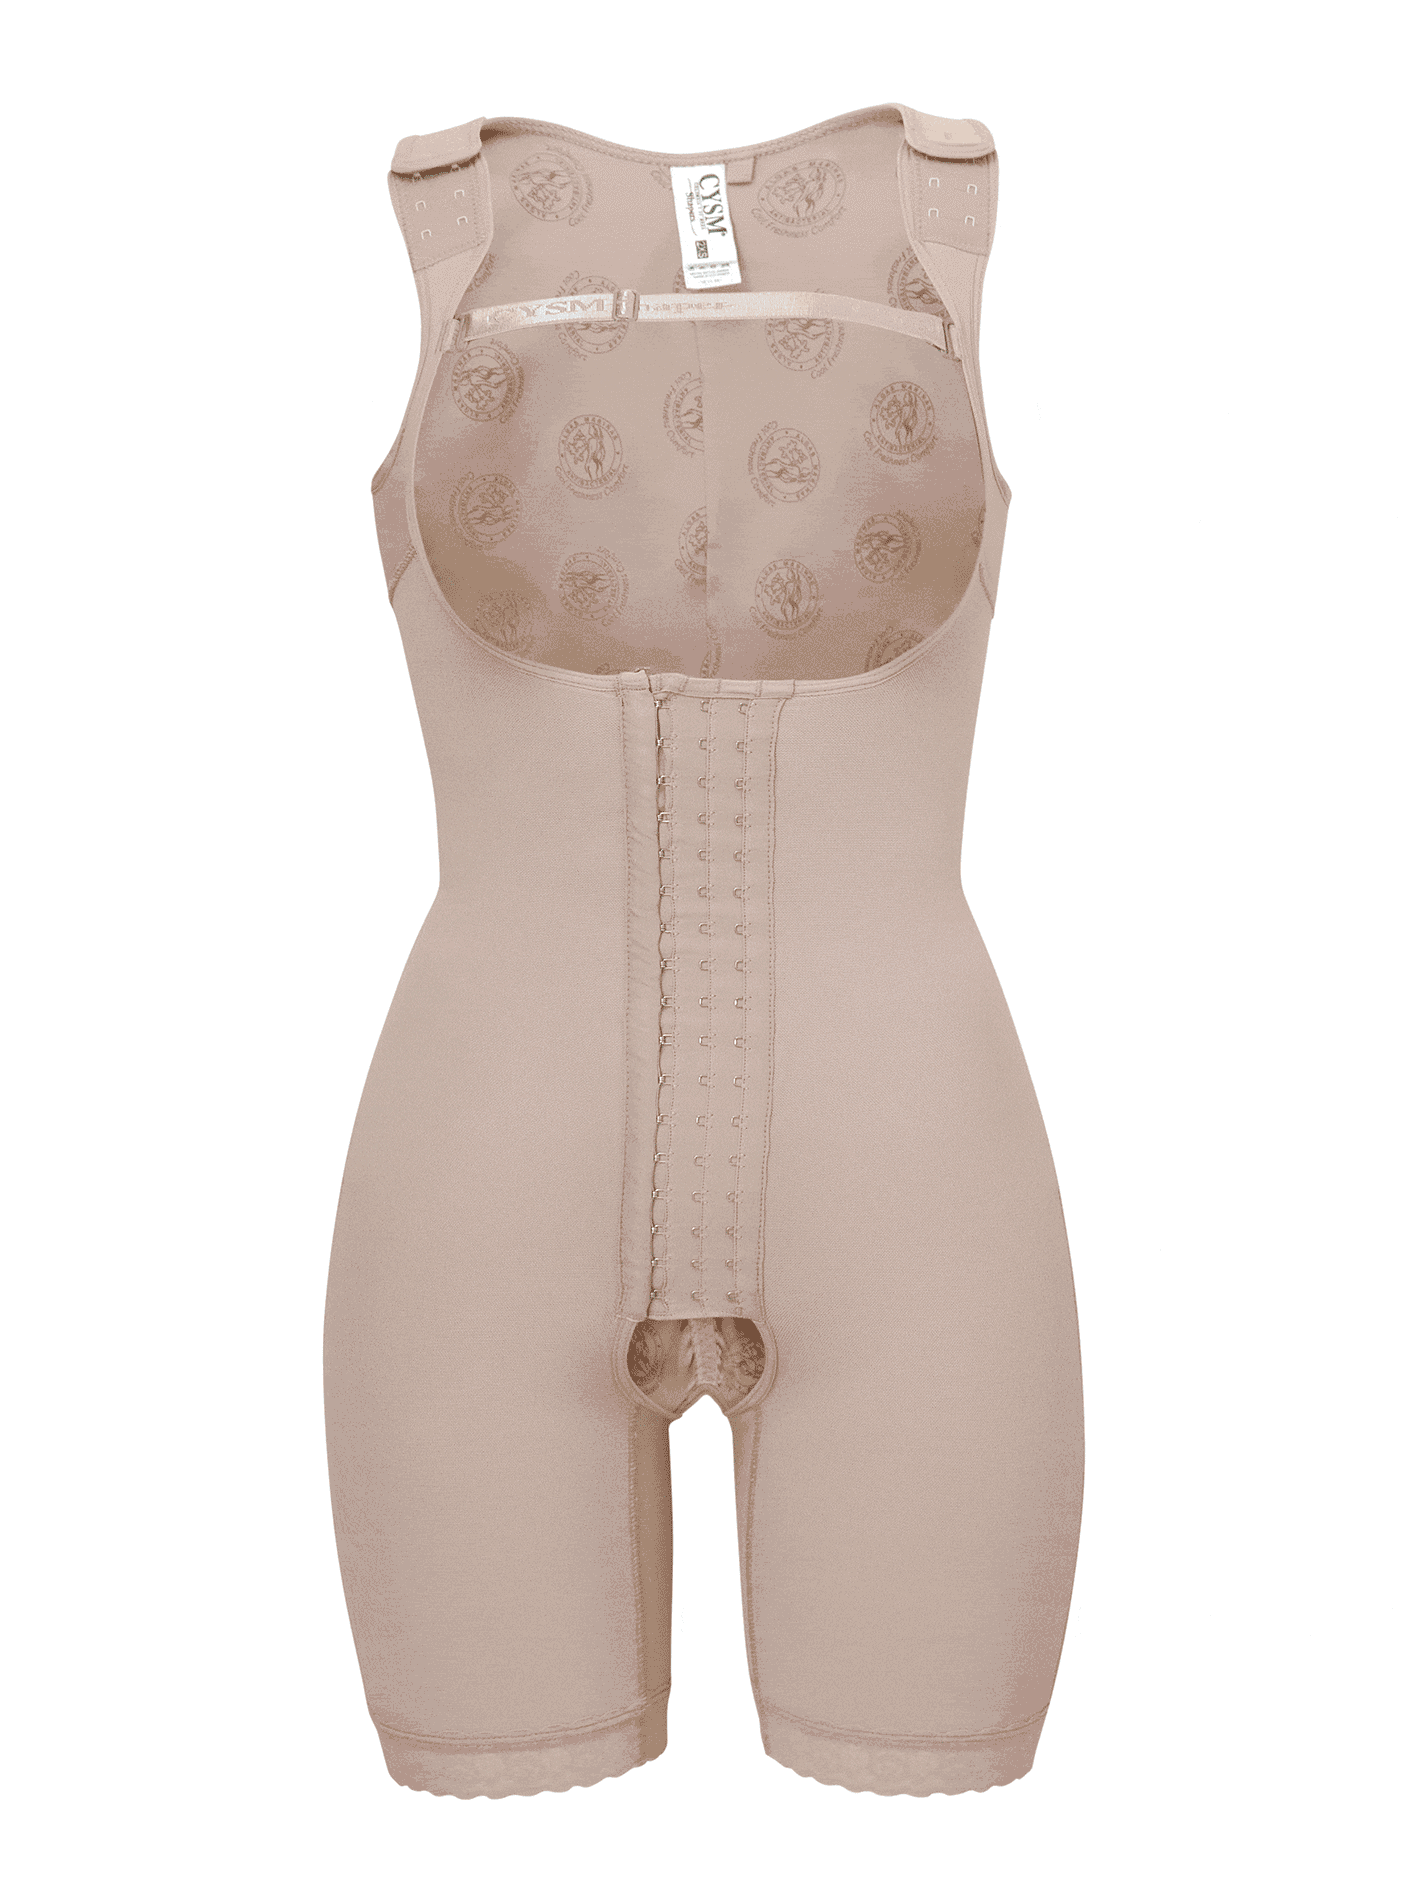 Post Surgery Compression Garments - Shapewear for Recovery — CYSM Shapers